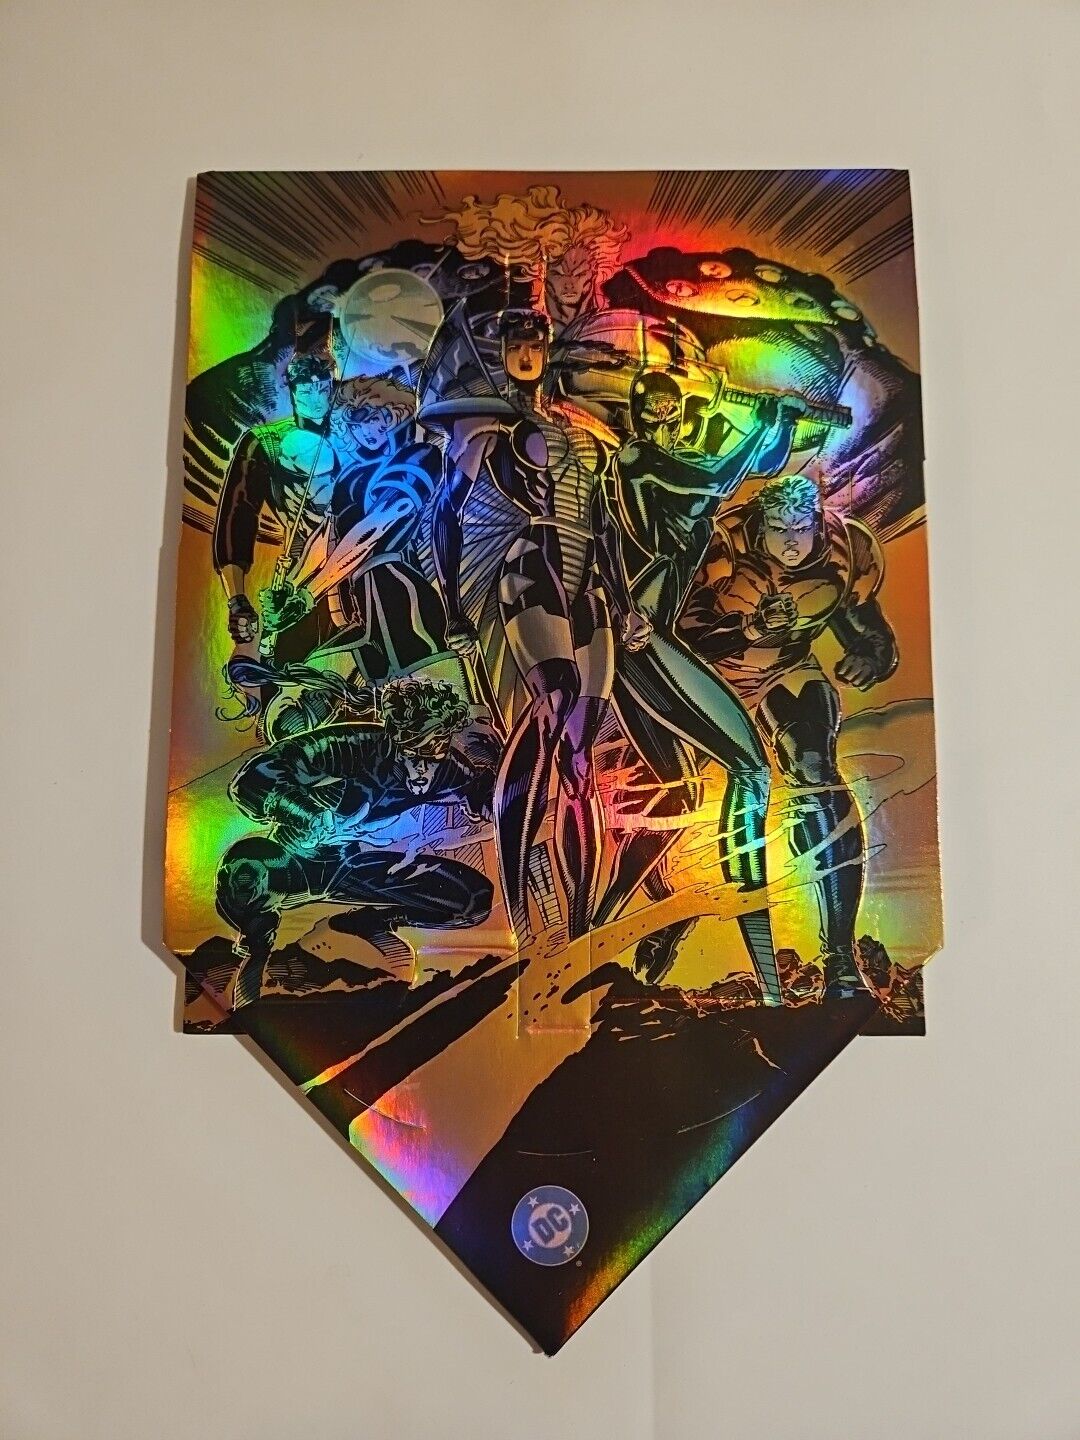 1995 SOVEREIGN SEVEN Holofoil Dealer Promo Counter Display Standee CLAREMONT